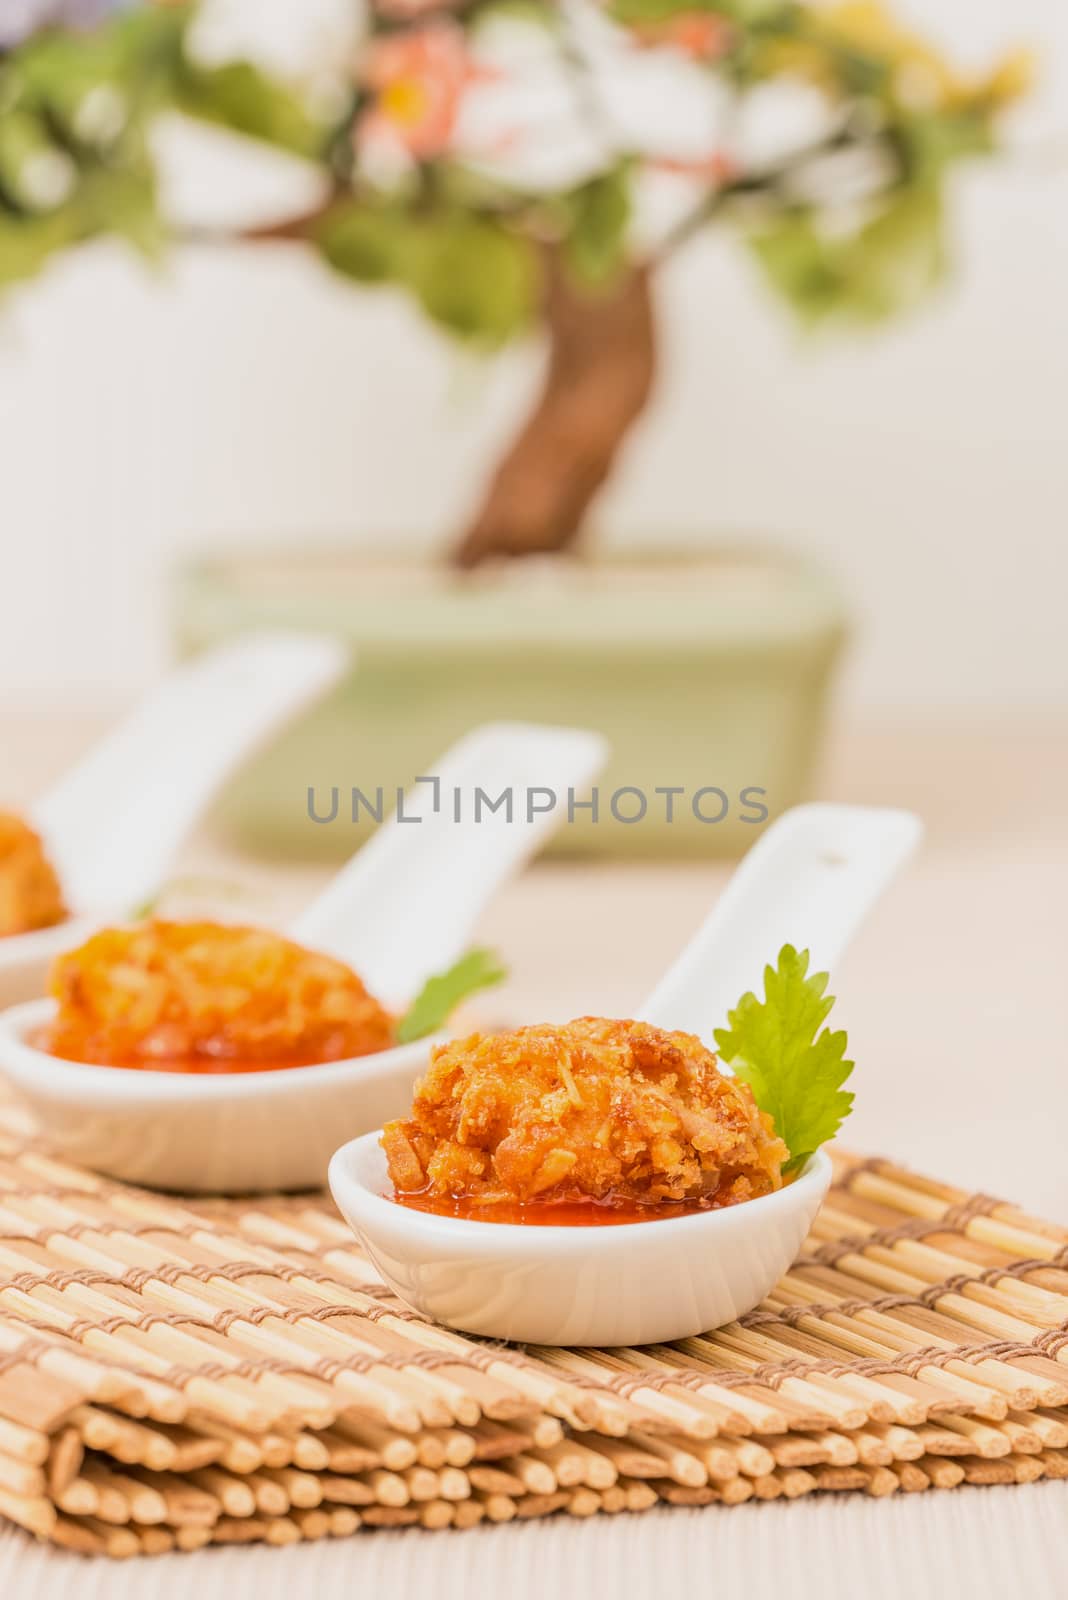 Coconut Chicken Appetizer Closeup by billberryphotography